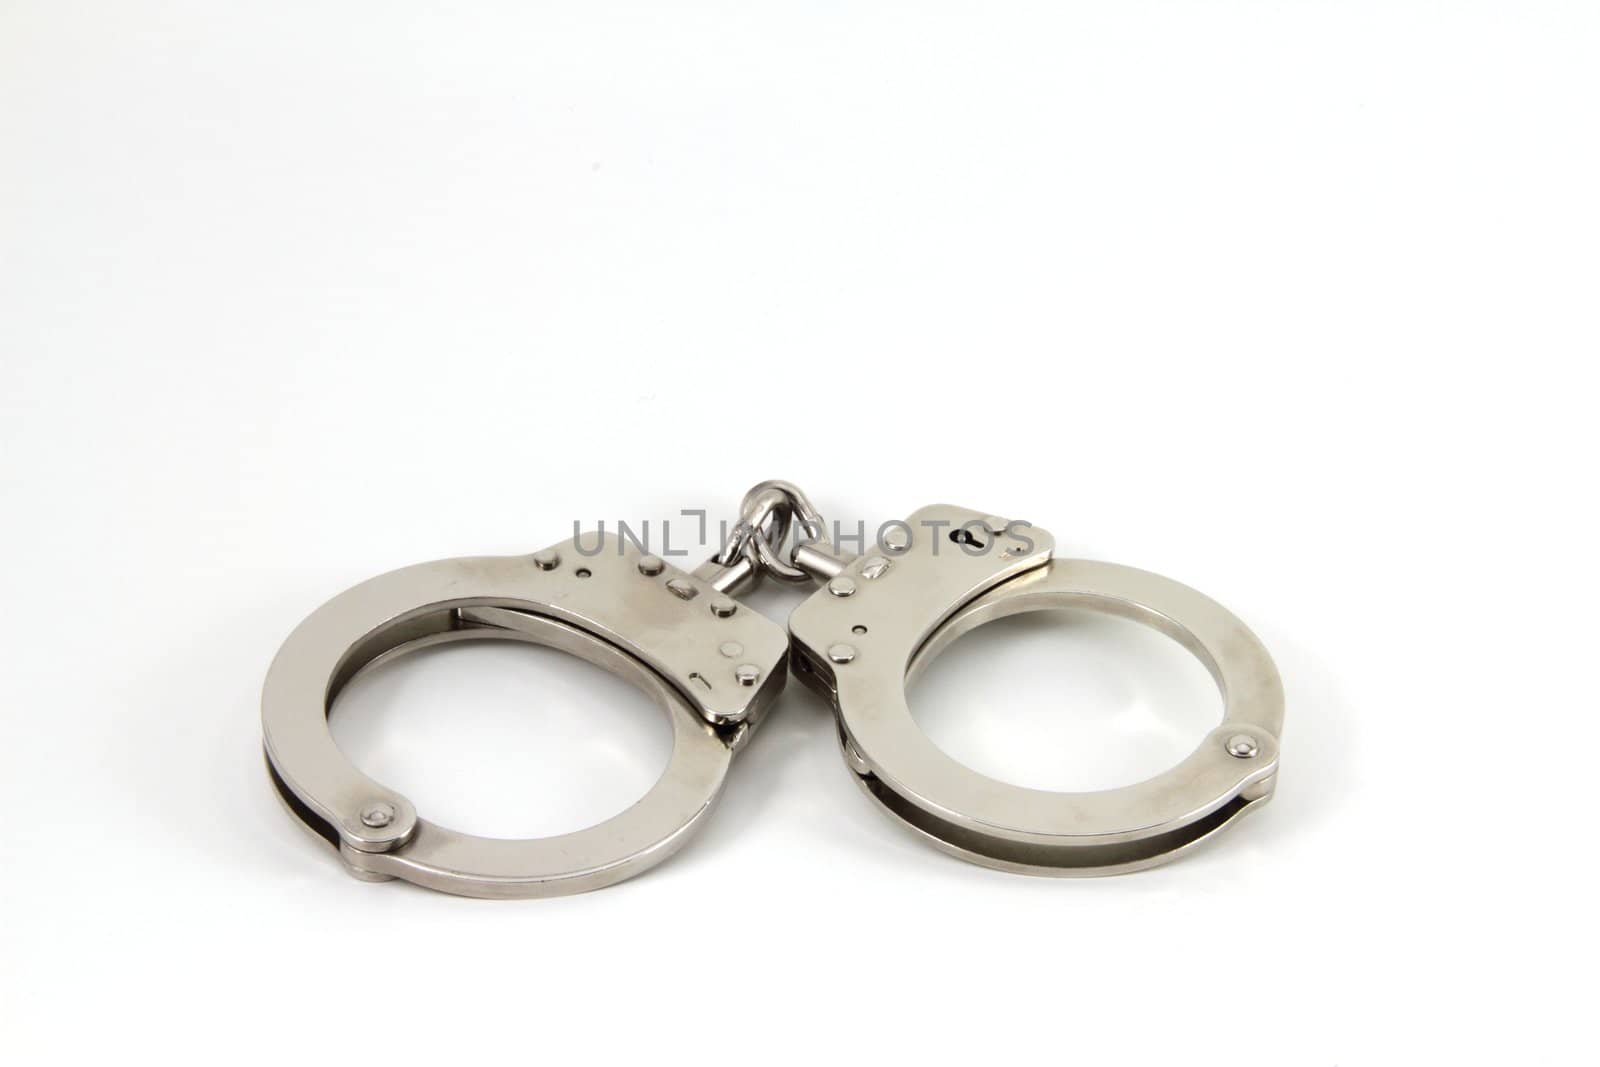 Police handcuffs isolate with copy space.
